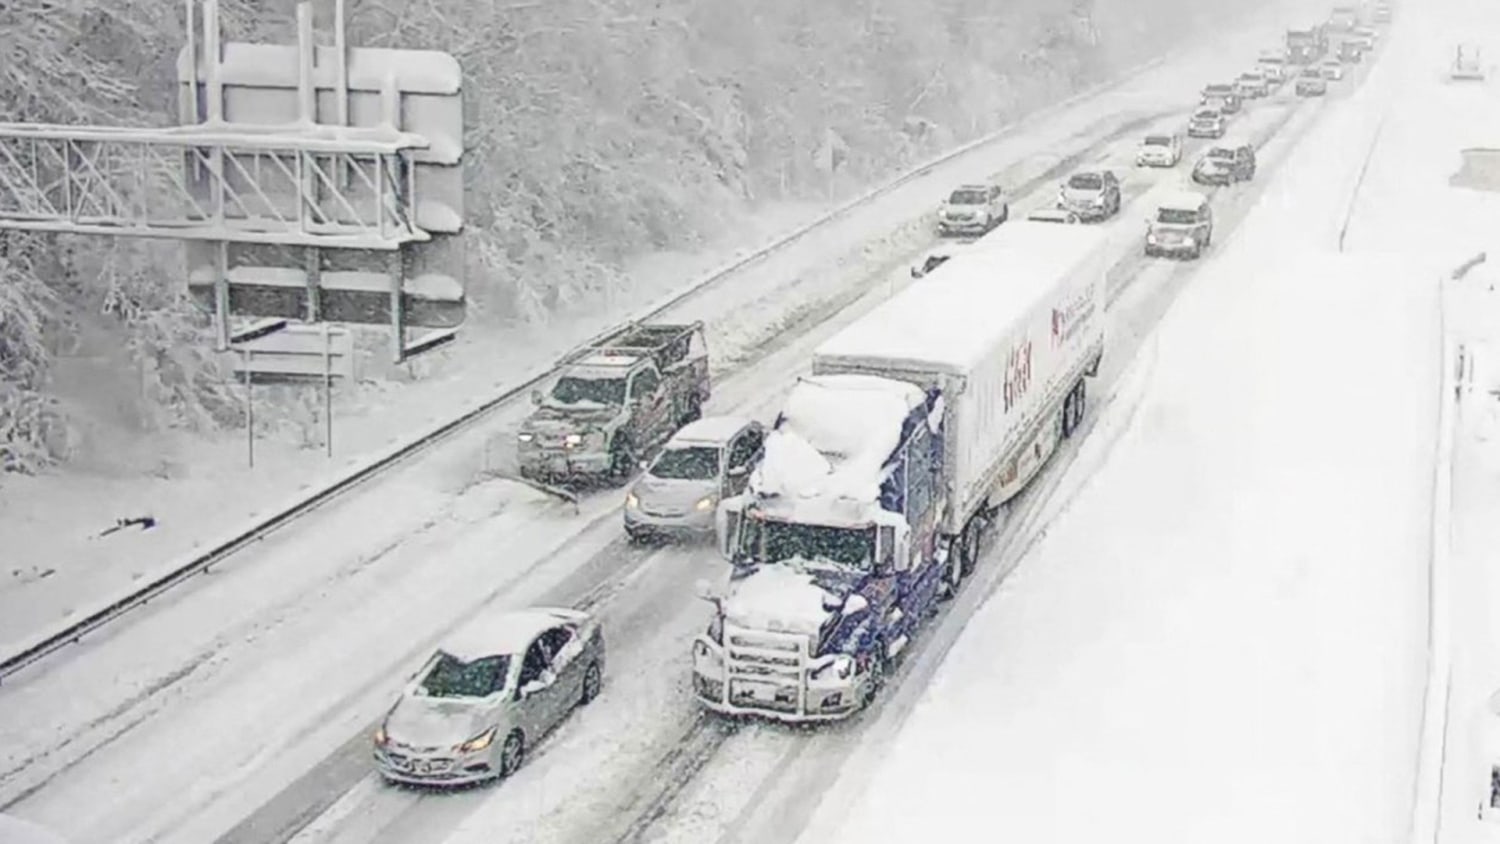 Several Southeastern States Declare States of Emergency Ahead of Massive Winter Storm